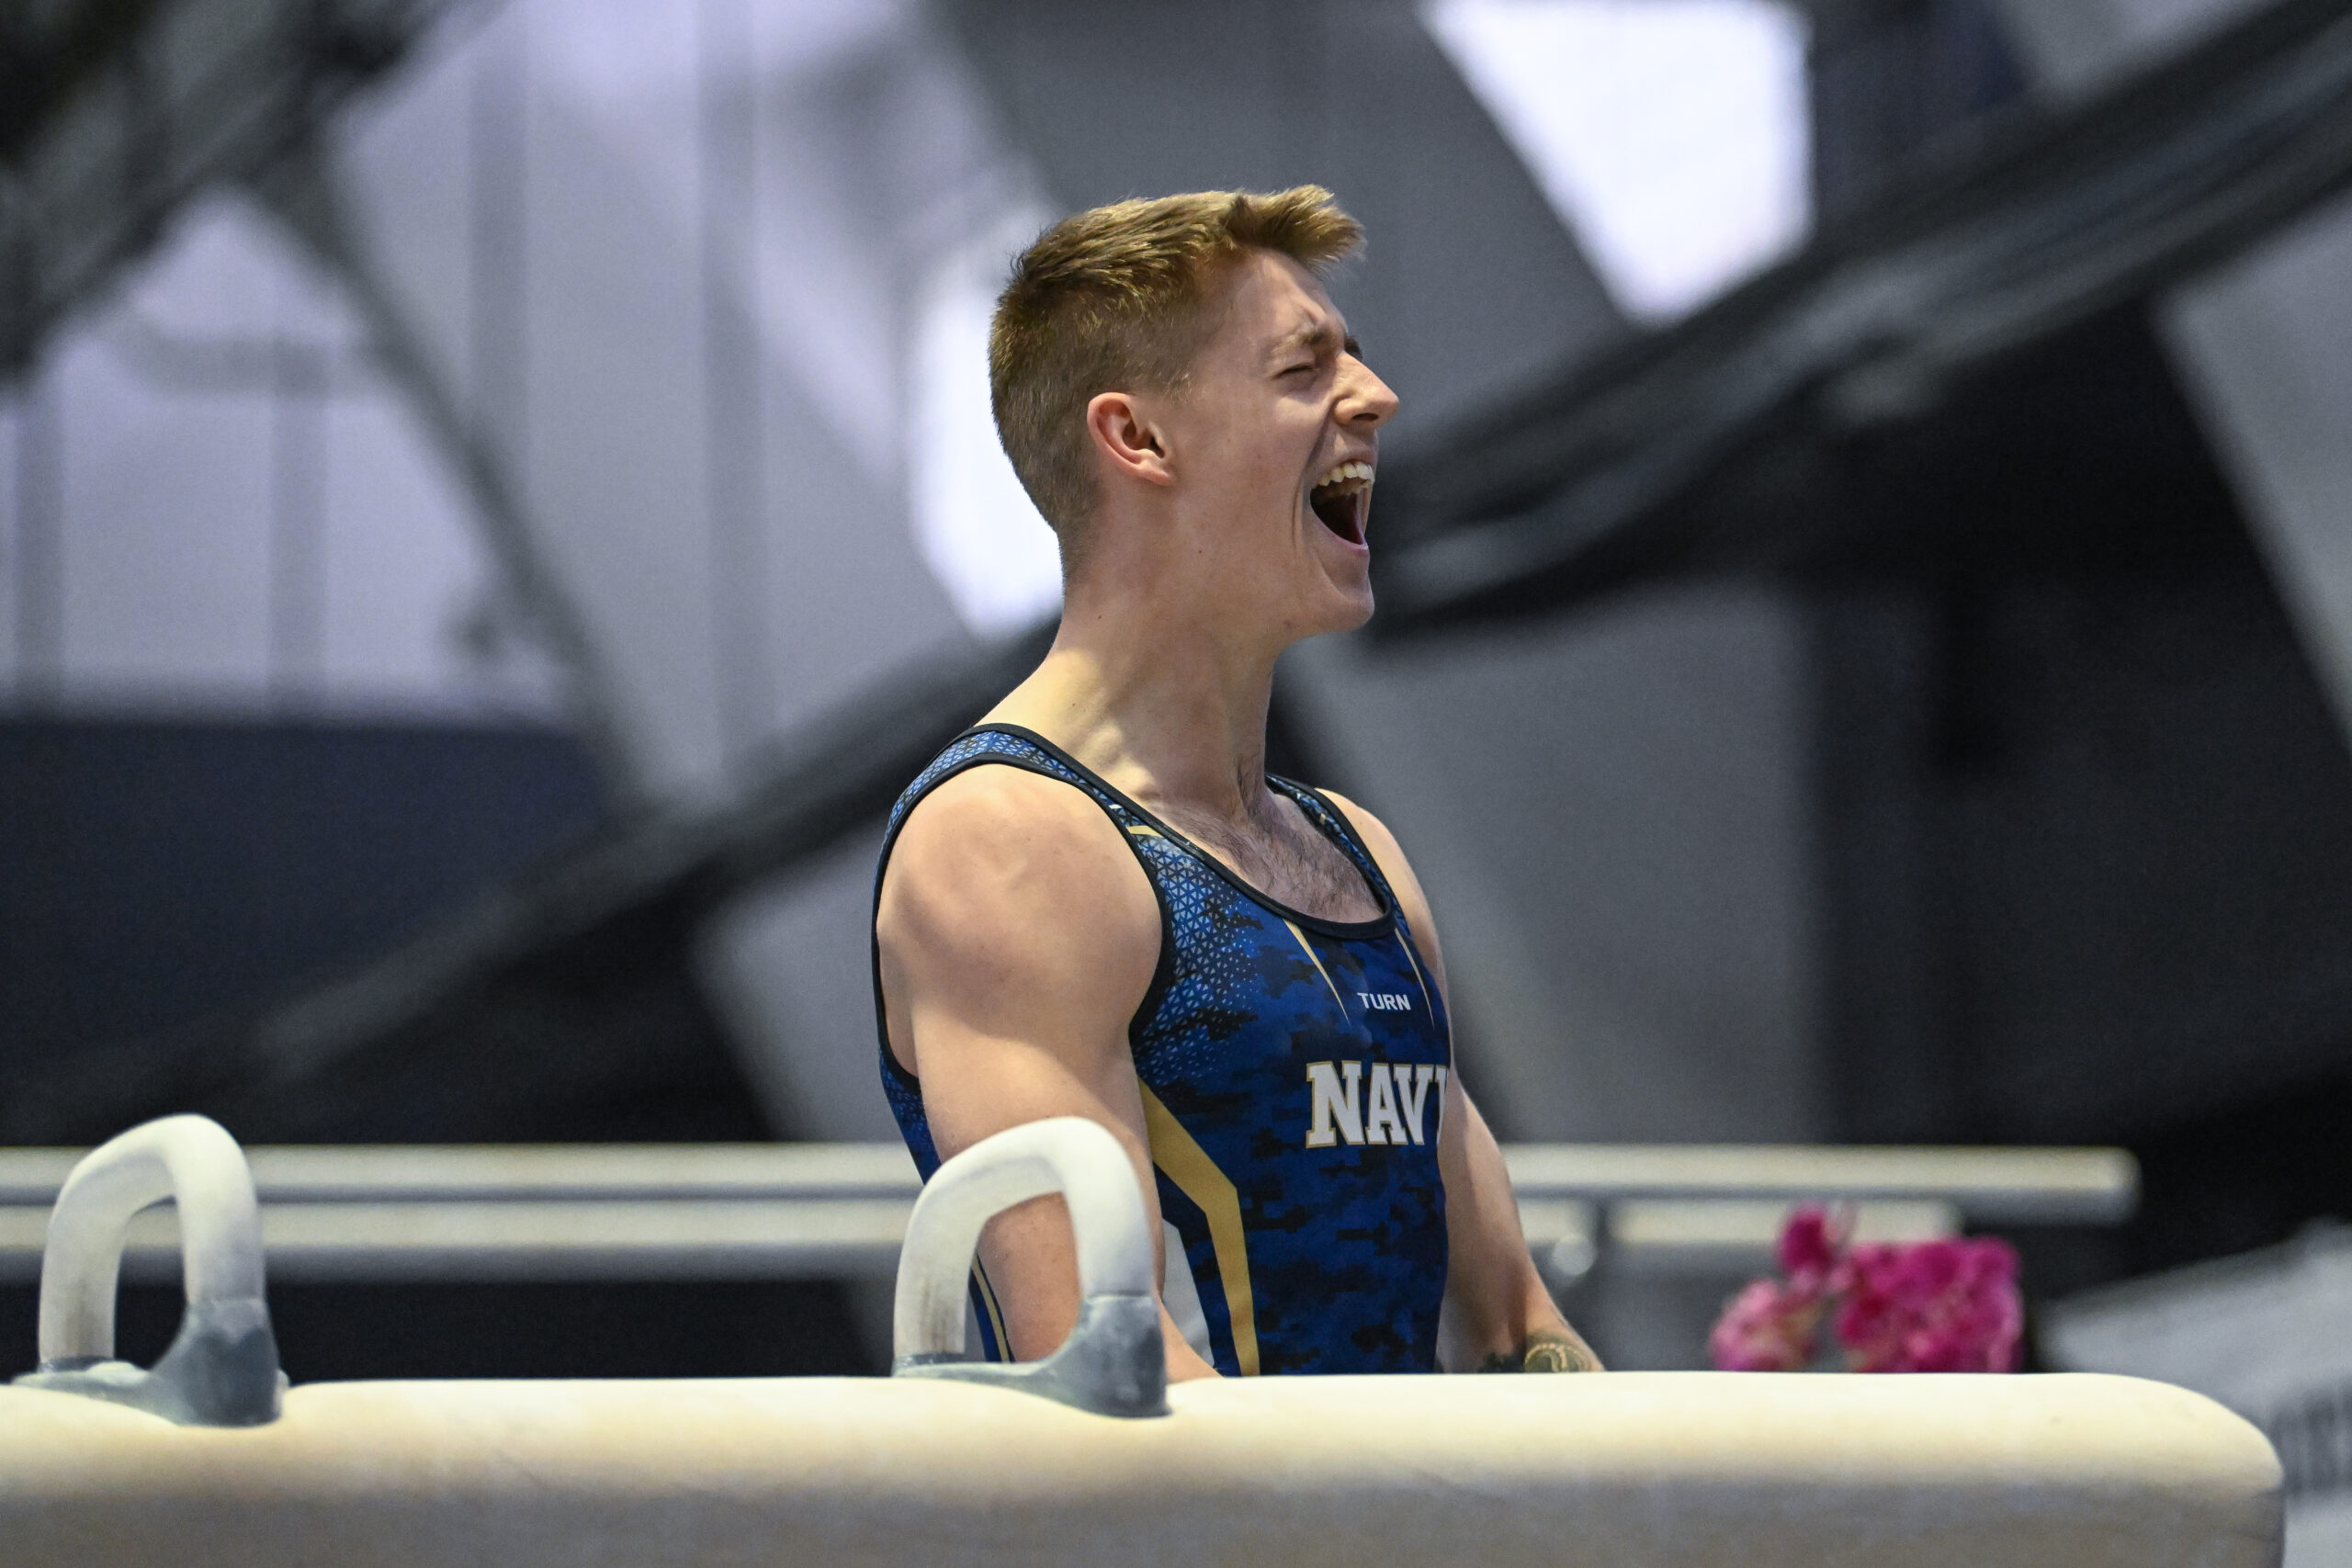 Navy's Ronan McQuillan reacts after dismounting pommel horse at the 2023 Navy Open.